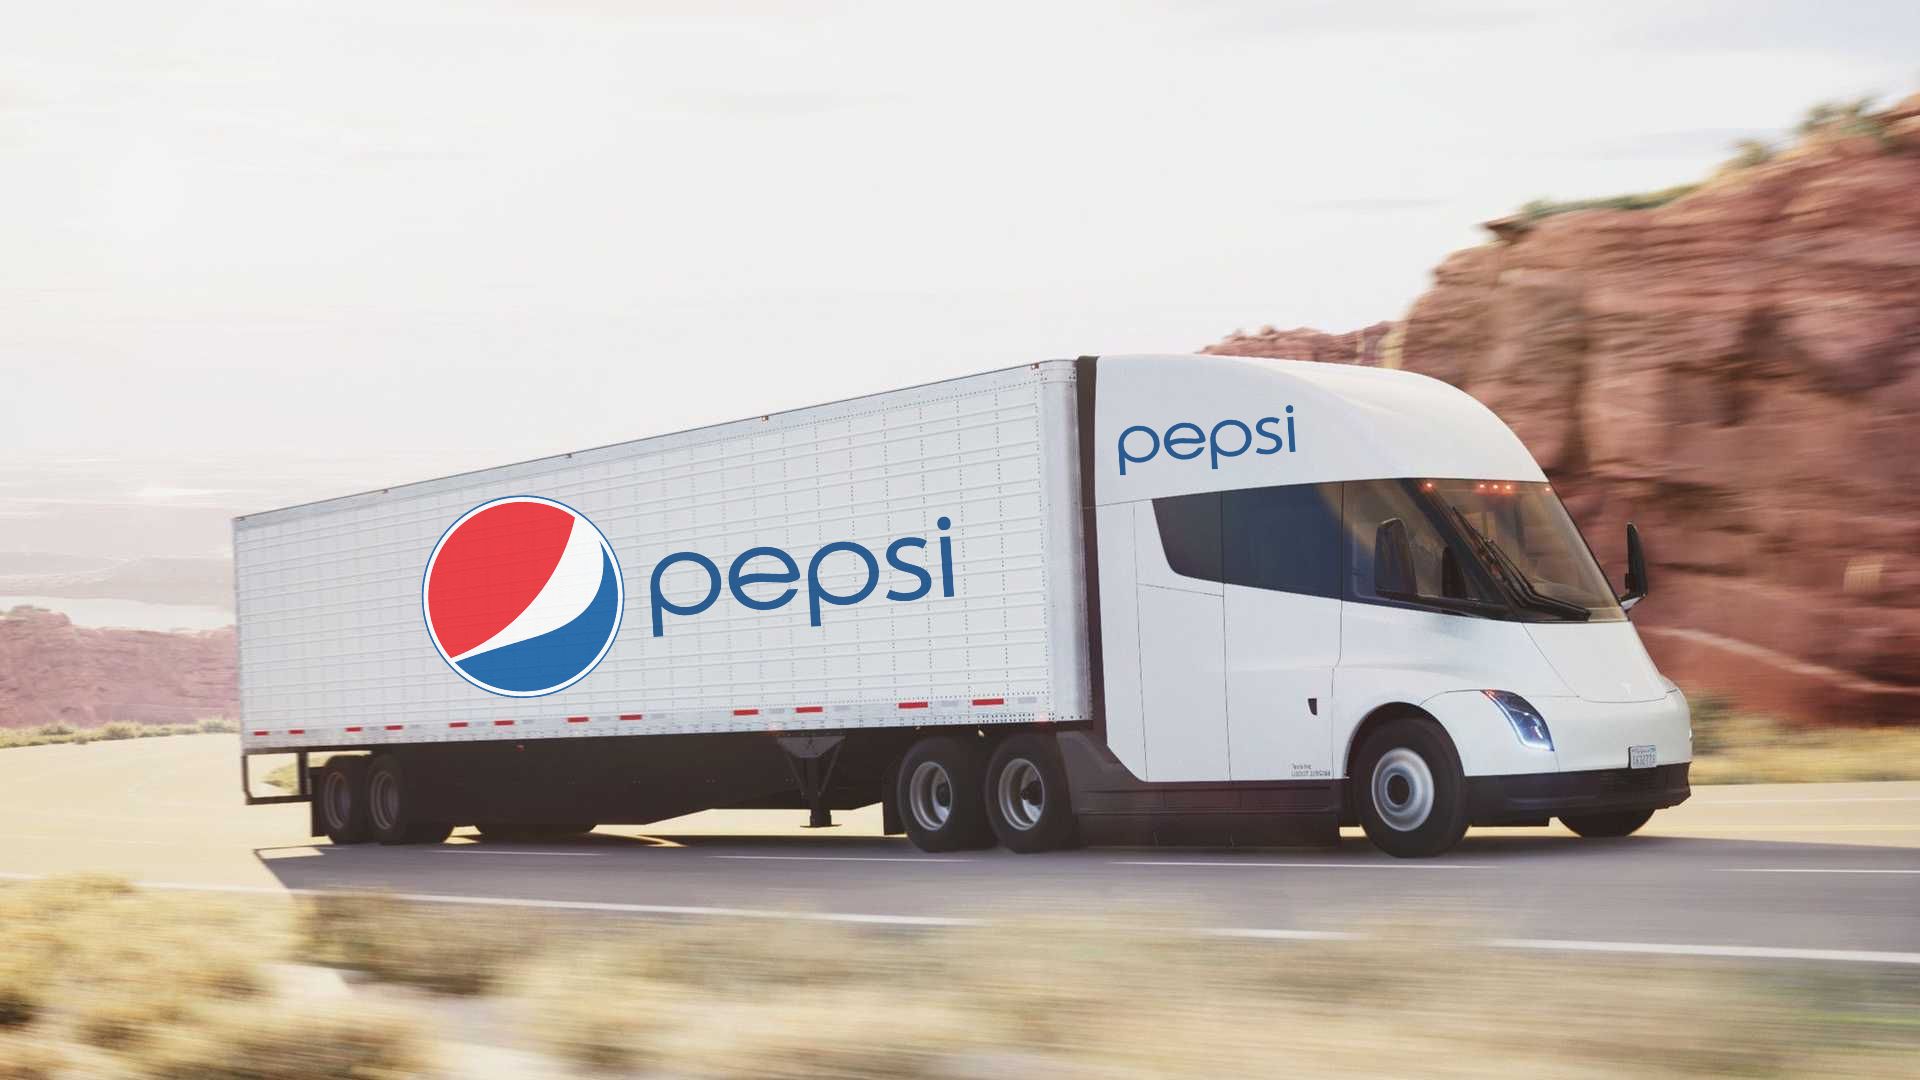 Tesla to Deliver First electric semi-truck to Pepsi: Elon Musk - E